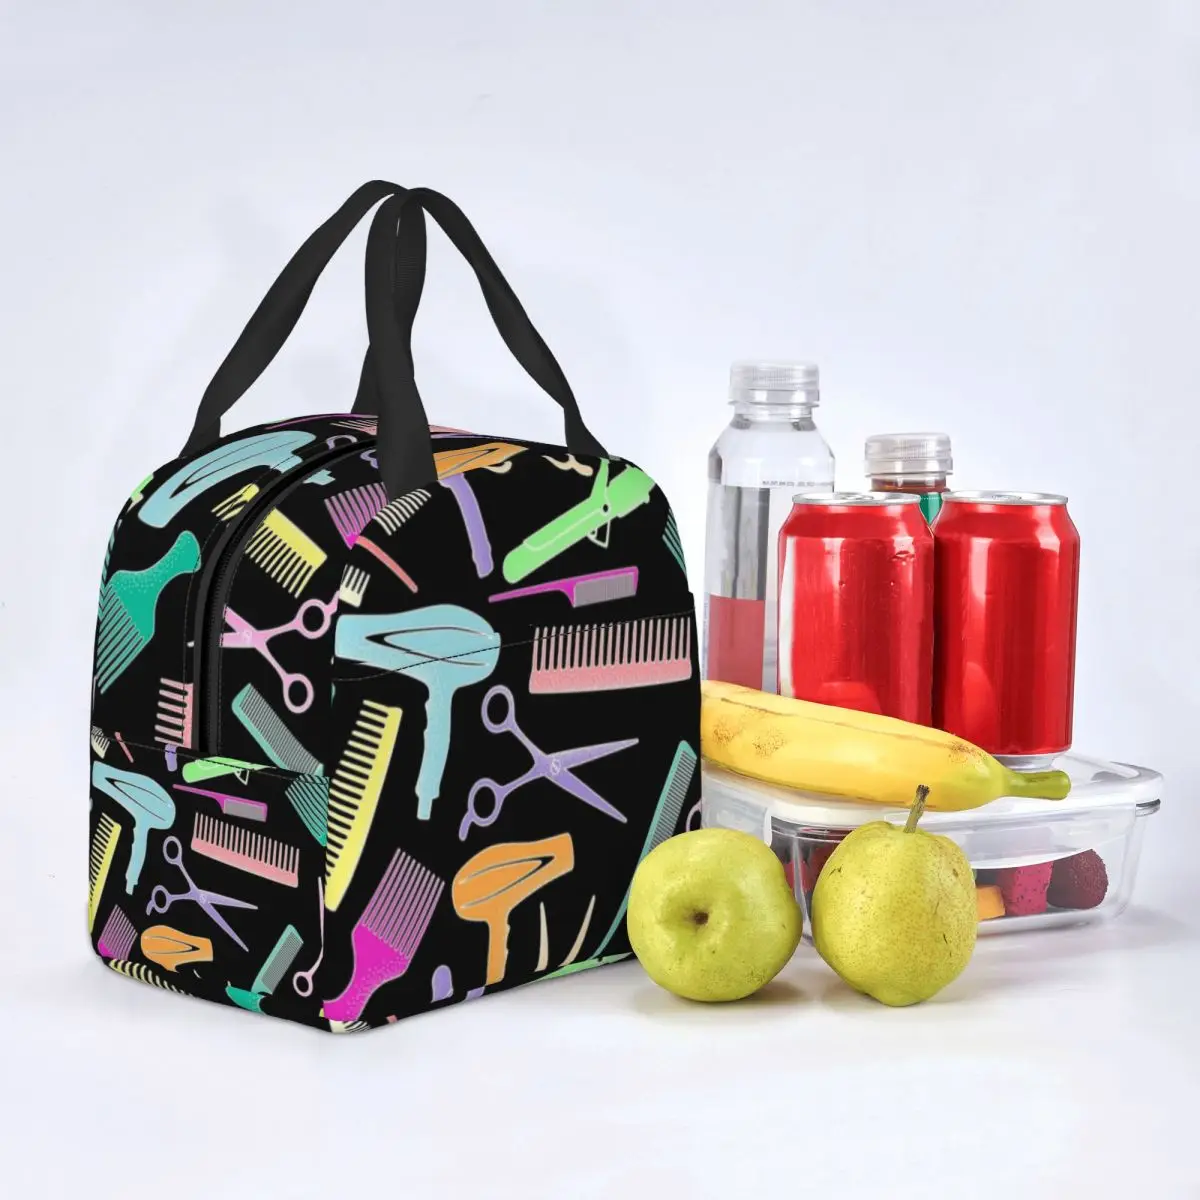 Salon Hair Dressing Tool Pattern Insulated Lunch Tote Bag for Women Hairdresser Barber Gift Resuable Thermal Cooler Bento Box images - 6